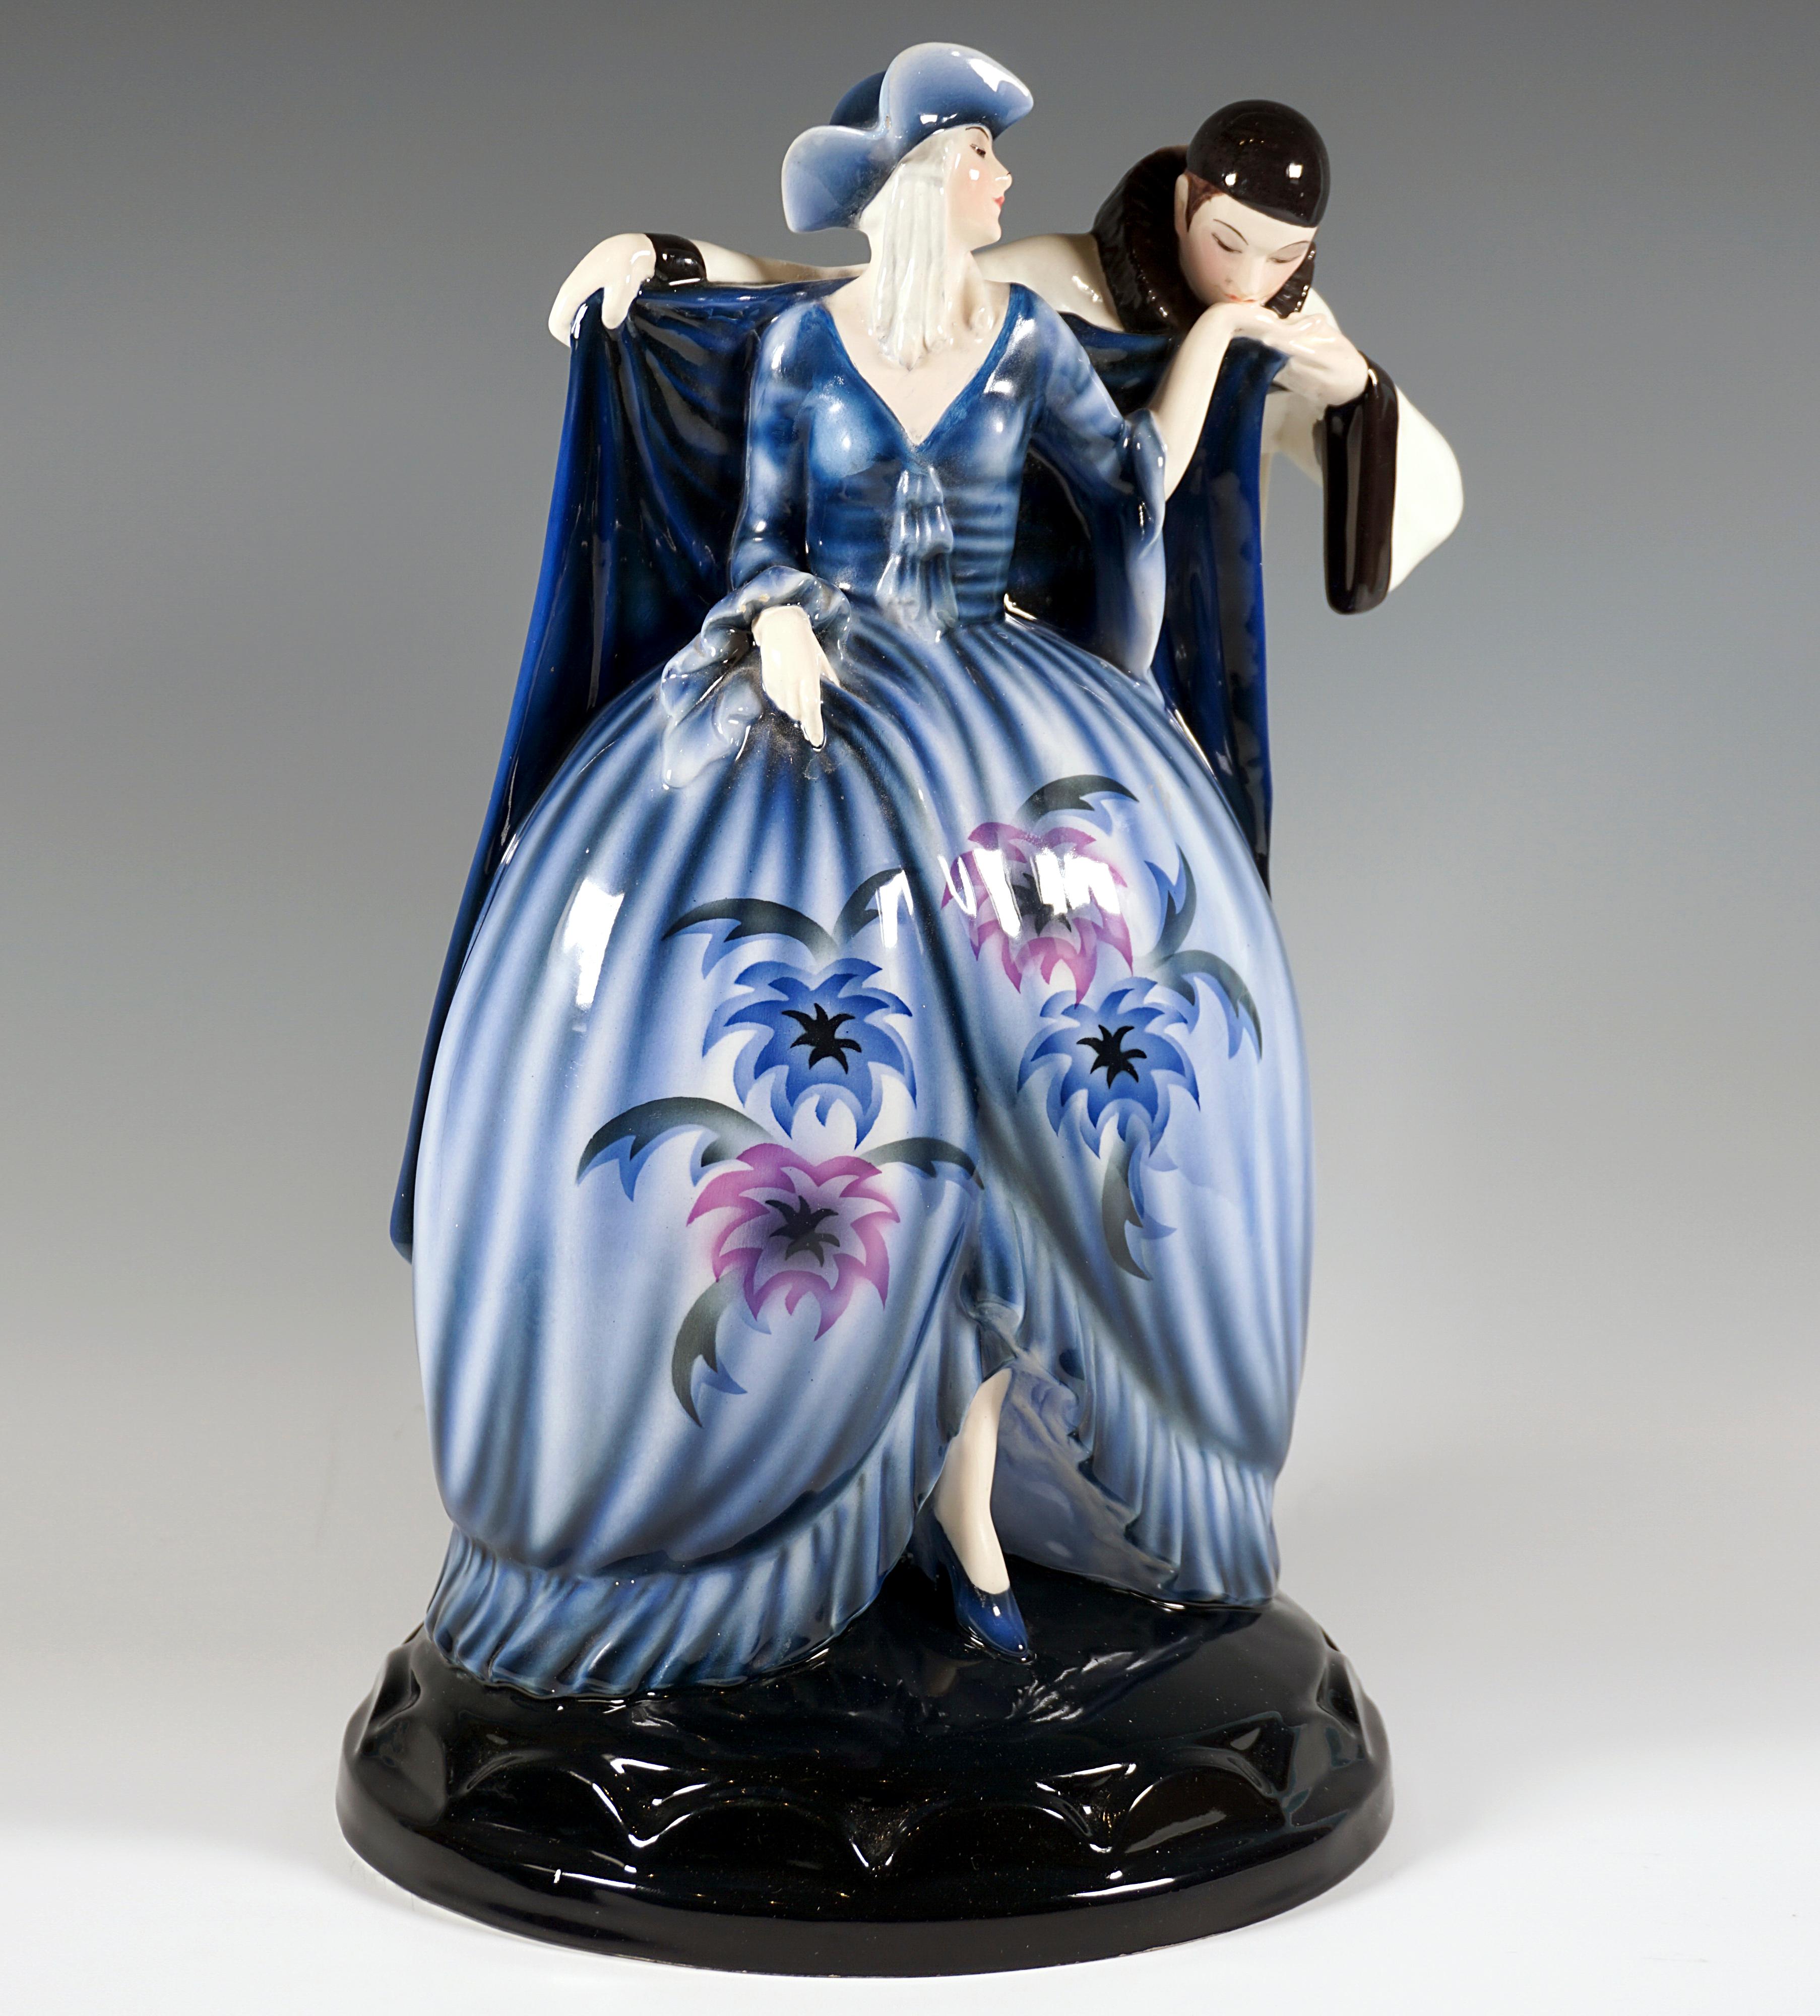 Depiction of a carnival dancing couple: Harlequin kissing the hand of his Columbine. The female figure in a close-fitting blue top with a low-cut front and long trumpet sleeves, a voluminous blue skirt with large floral decorations in blue, purple